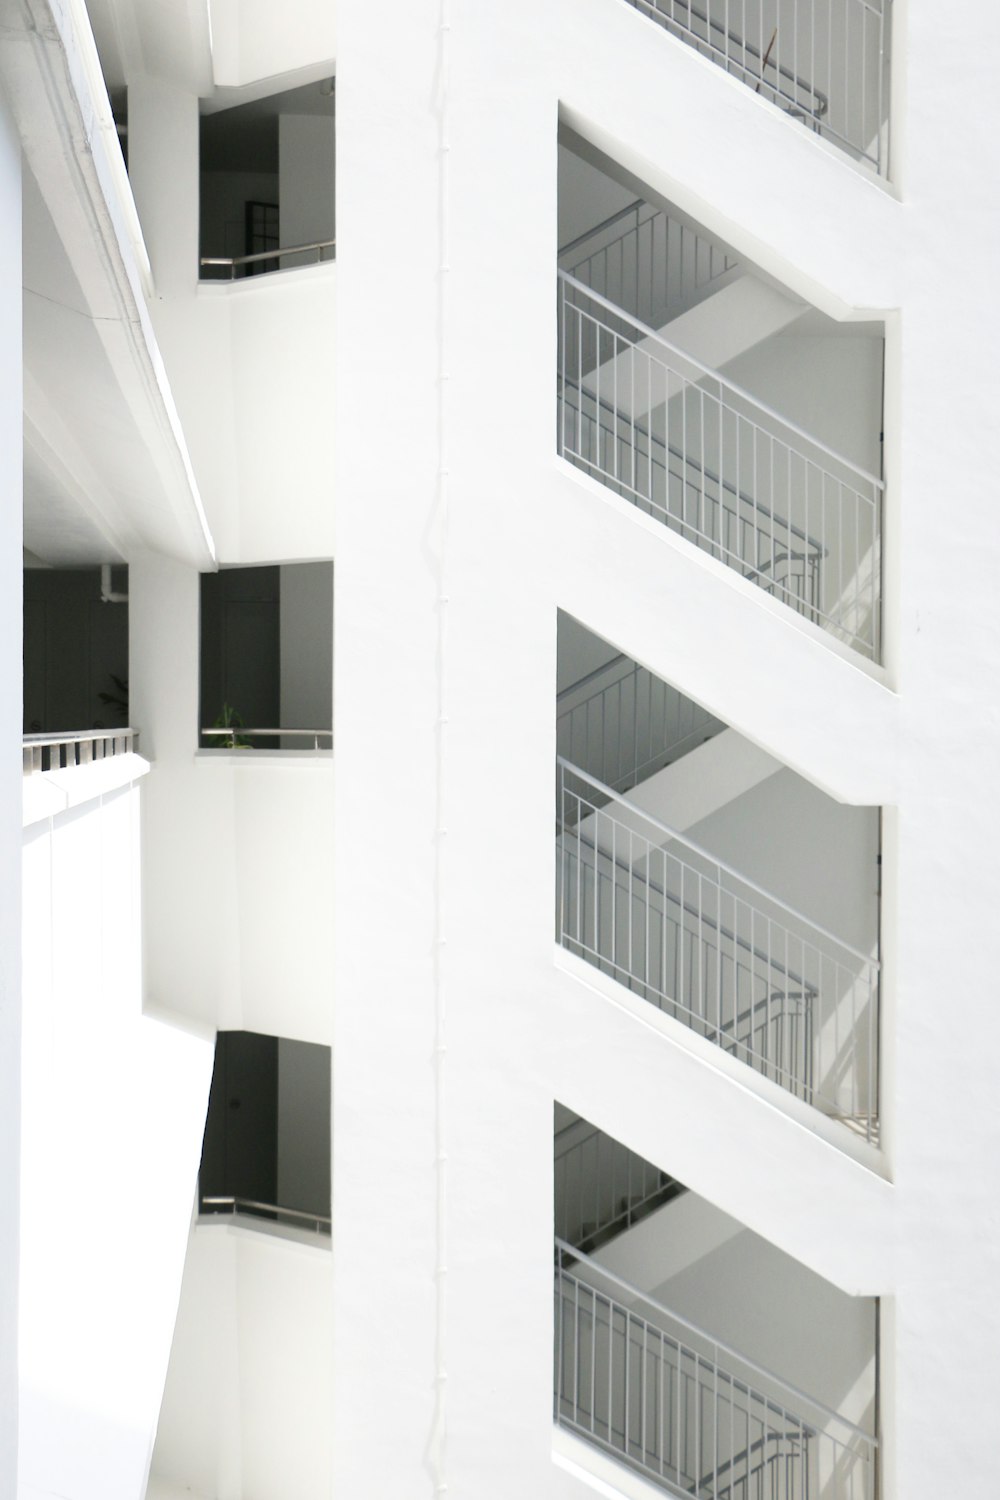 a white building with balconies and balconies